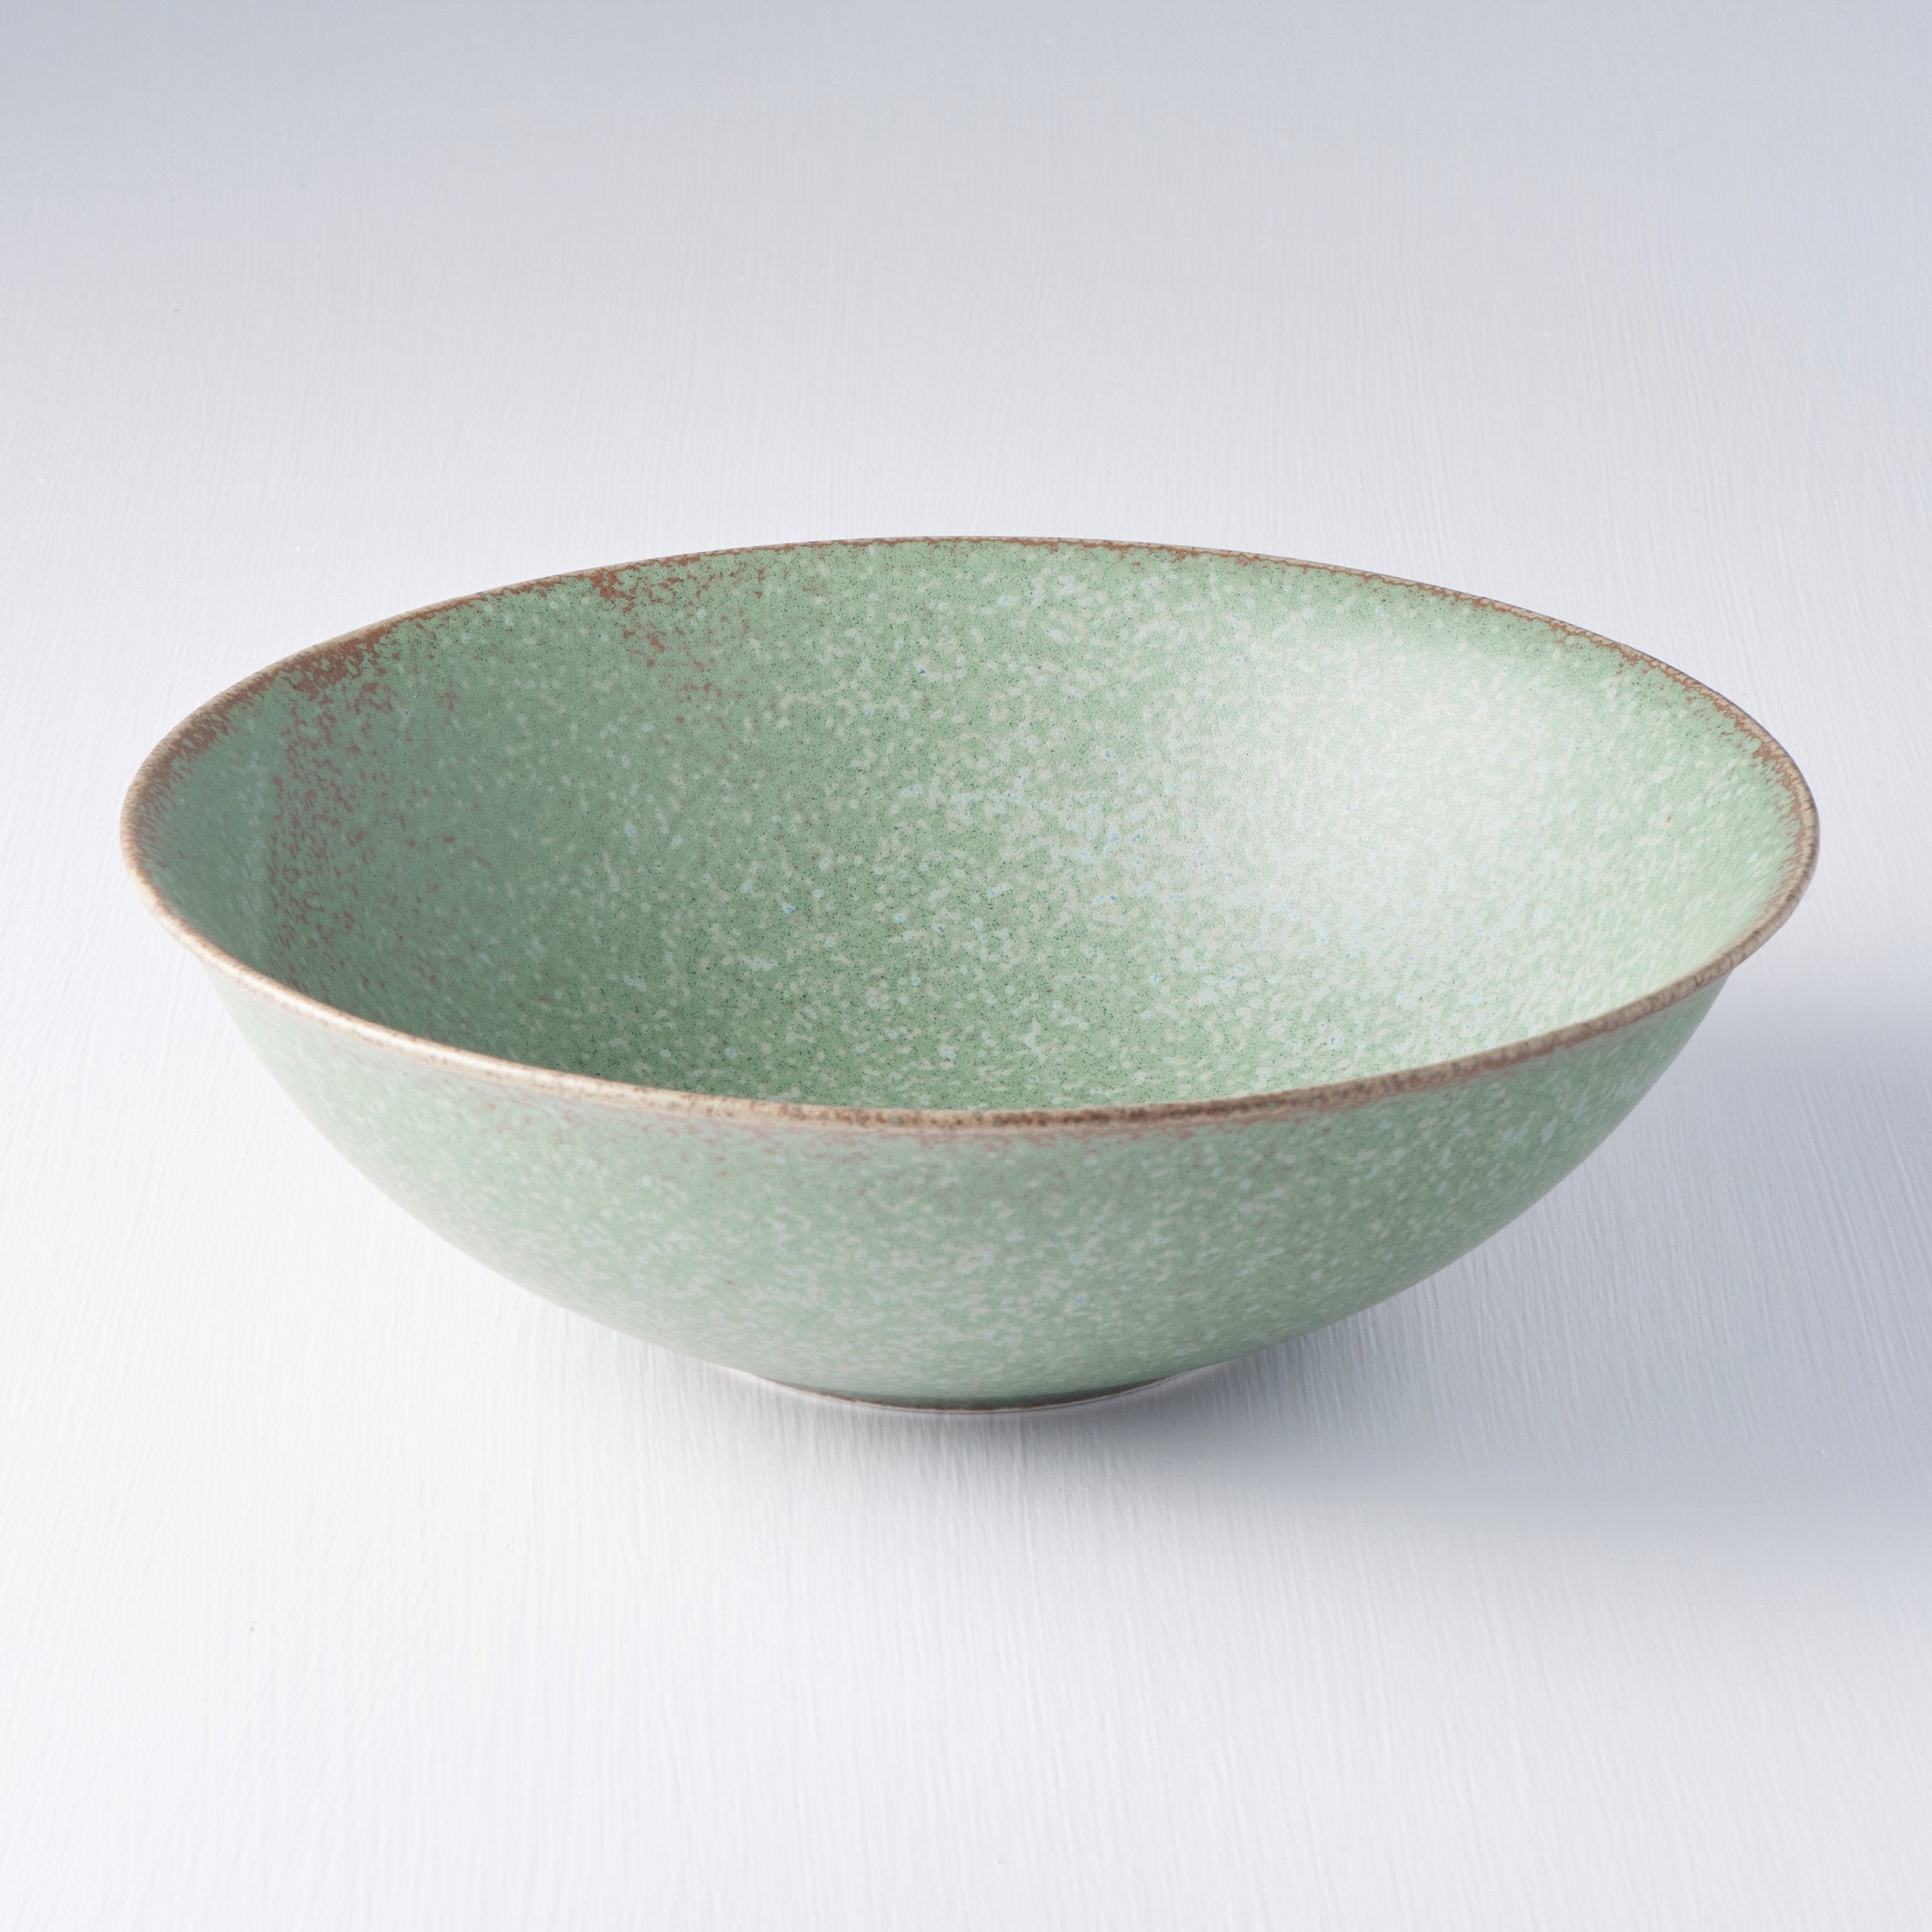 Save on Green Fade Open Bowl Made in Japan at BEON. 22cm diameter x 6cm height Open bowl in Green Fade design. The Green Fade glaze features a lush, forest green tone with button-flower blue highlights and an edge of light brown. Each piece has a unique dappled pattern determined by its position in the kiln during the firing process. The beautifully shaped bowl can be used for noodles, soups, salads, pasta and risottos Handcrafted in Japan. Microwave and dishwasher safe.